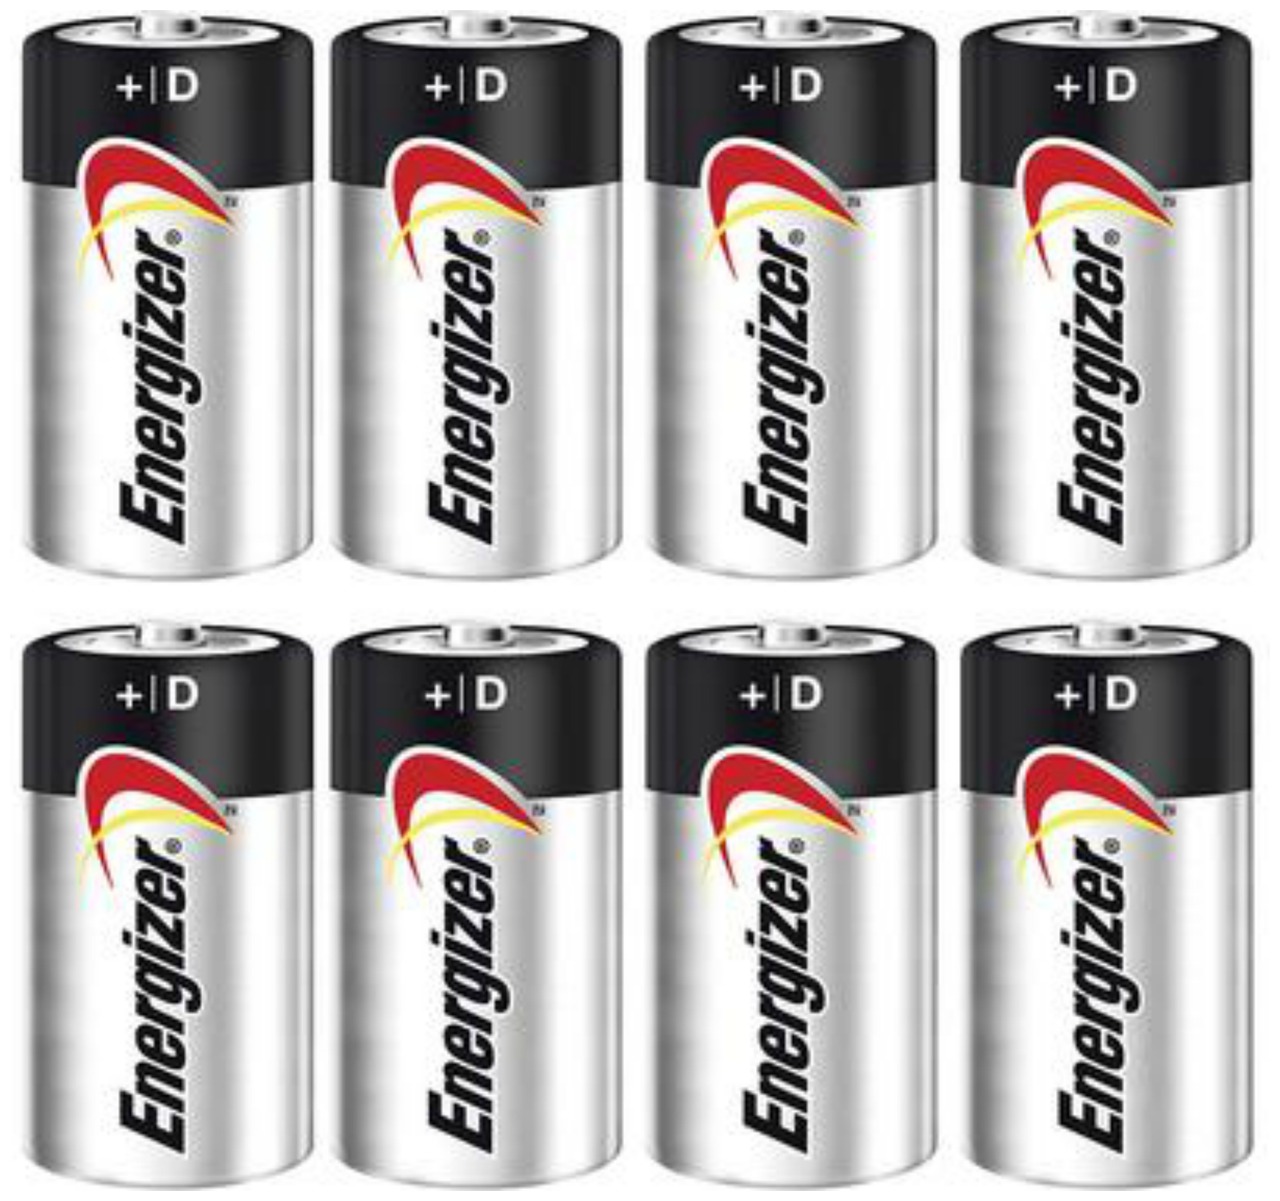 Energizer Max Alkaline D Size Batteries E95VP - 8 Pack + FREE SHIPPING!